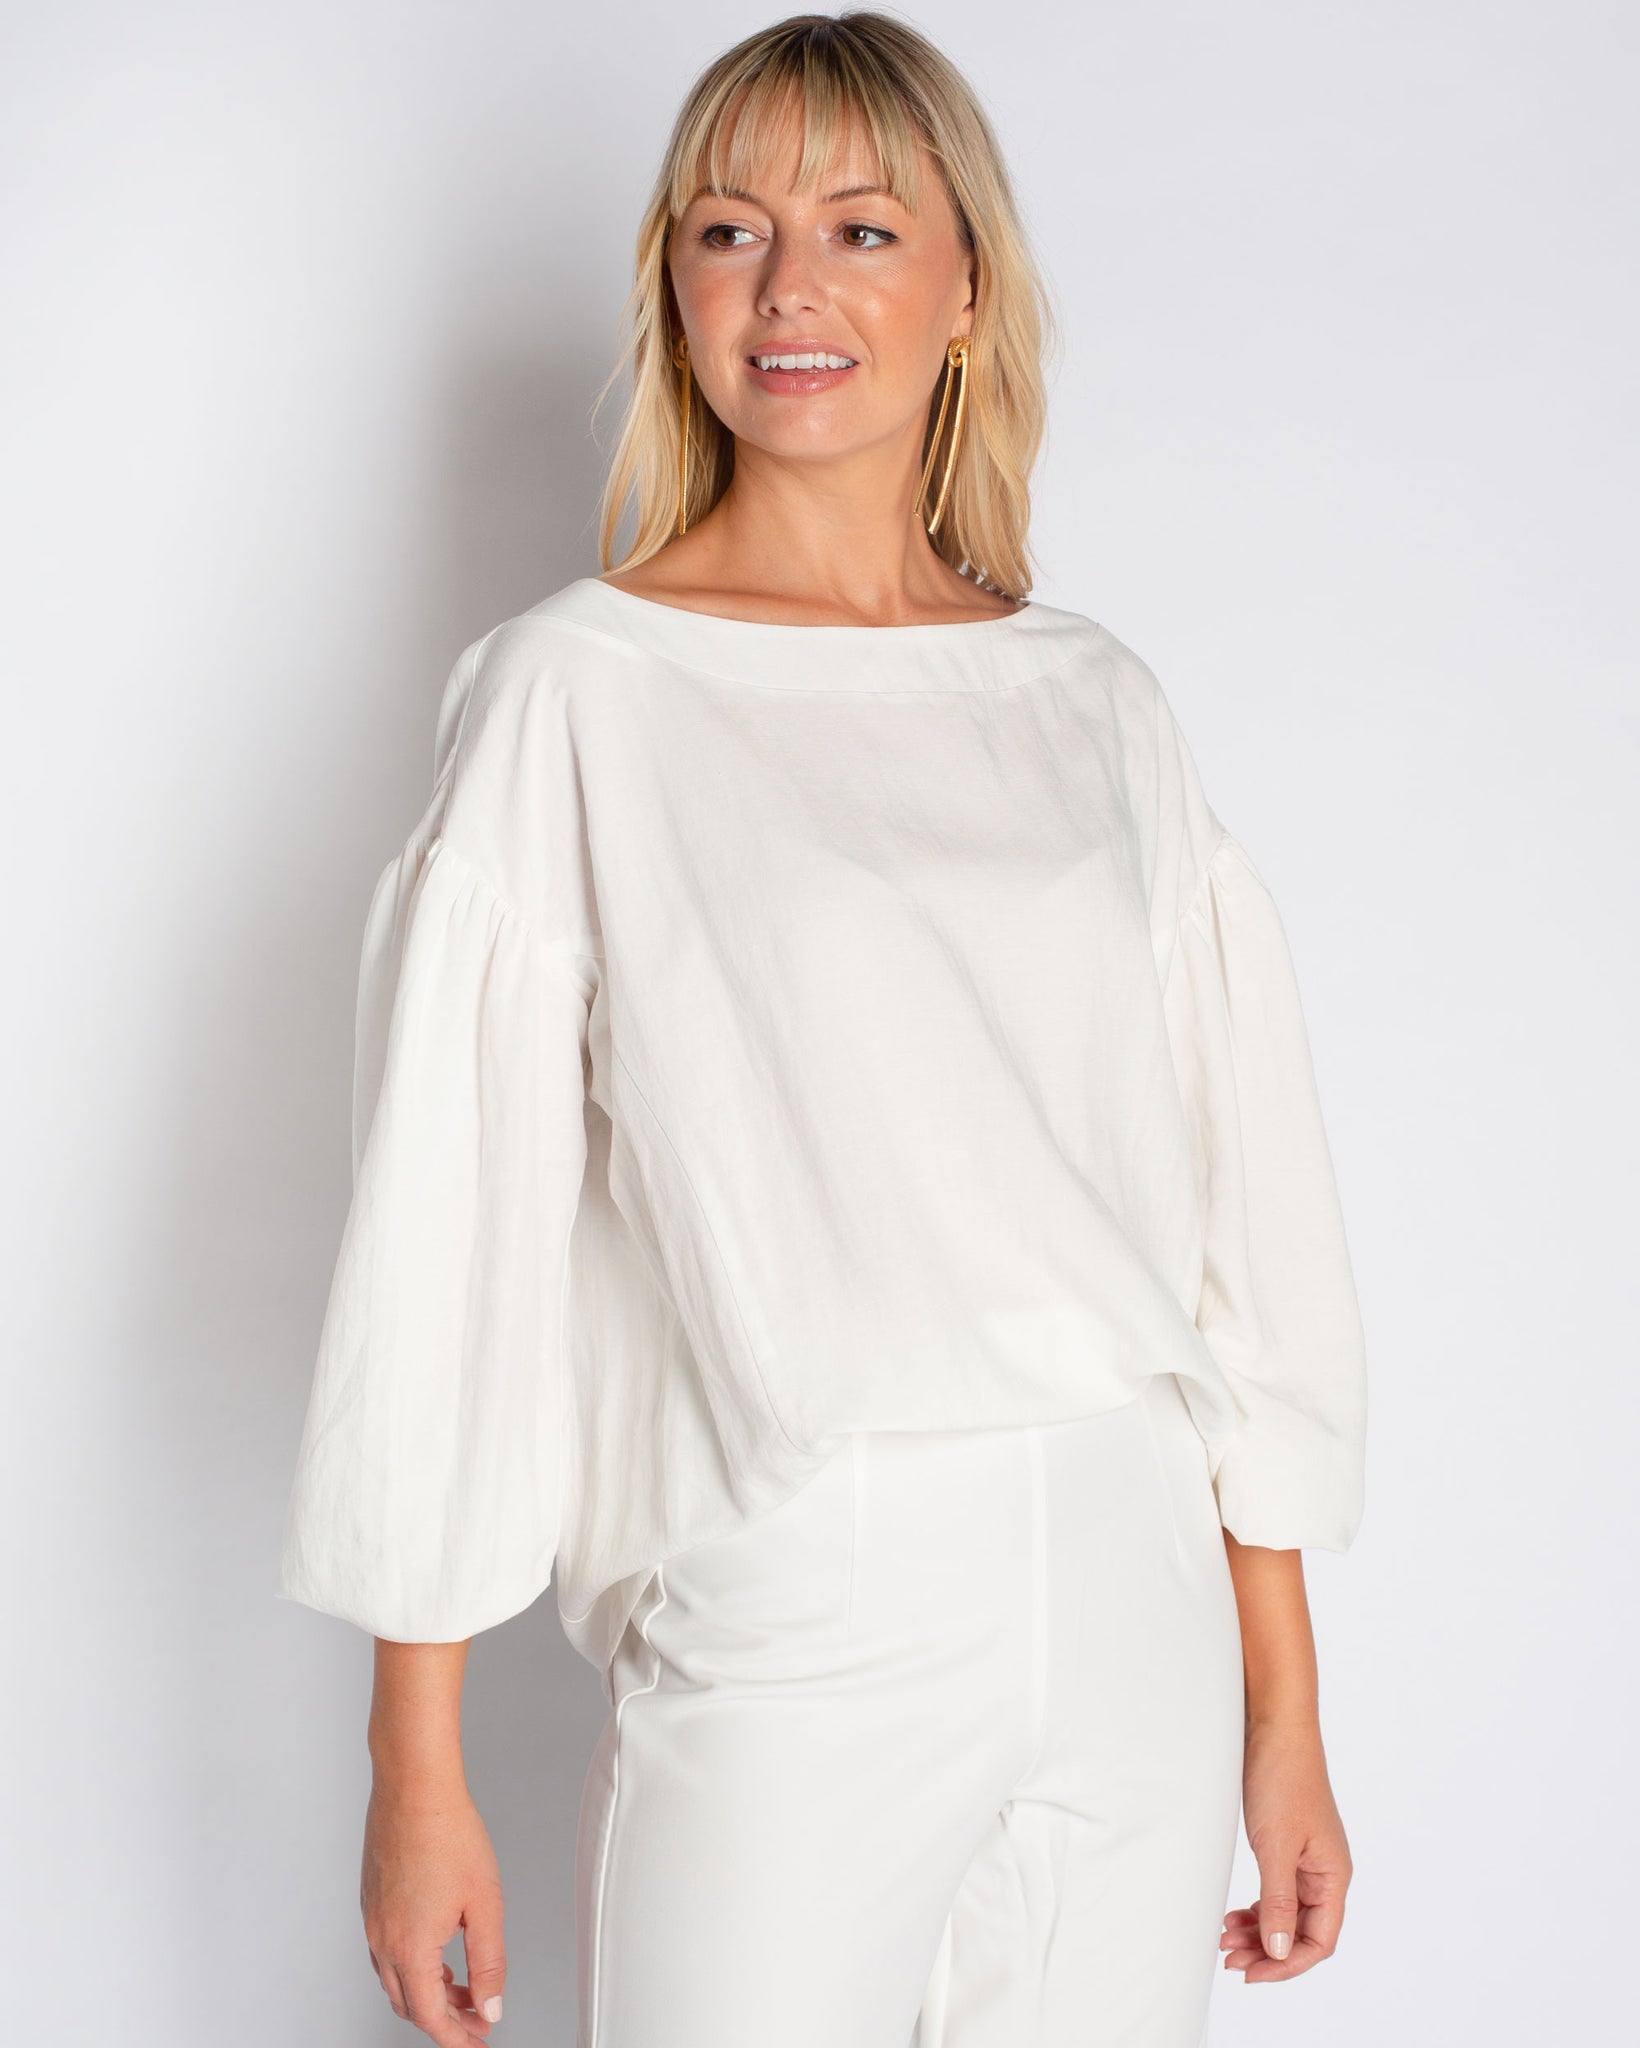 The Jewel Blouse in Linen